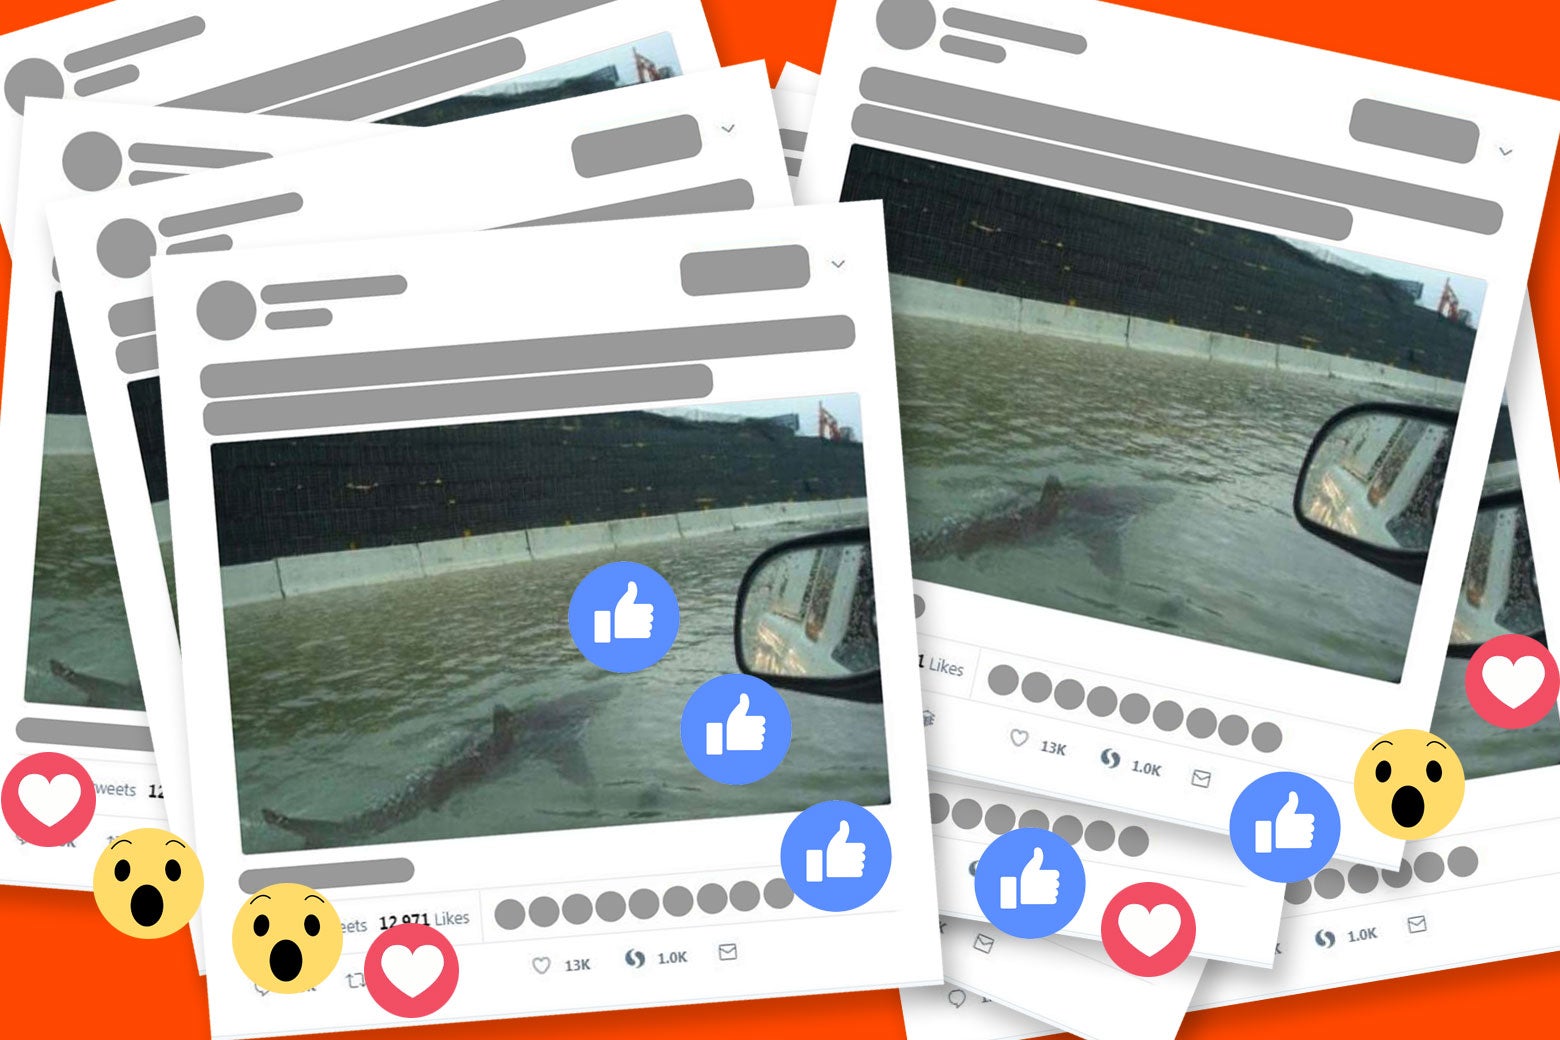 A photoshopped image of a shark swimming on a flooded Houston highway liked and shared over and over on social media.